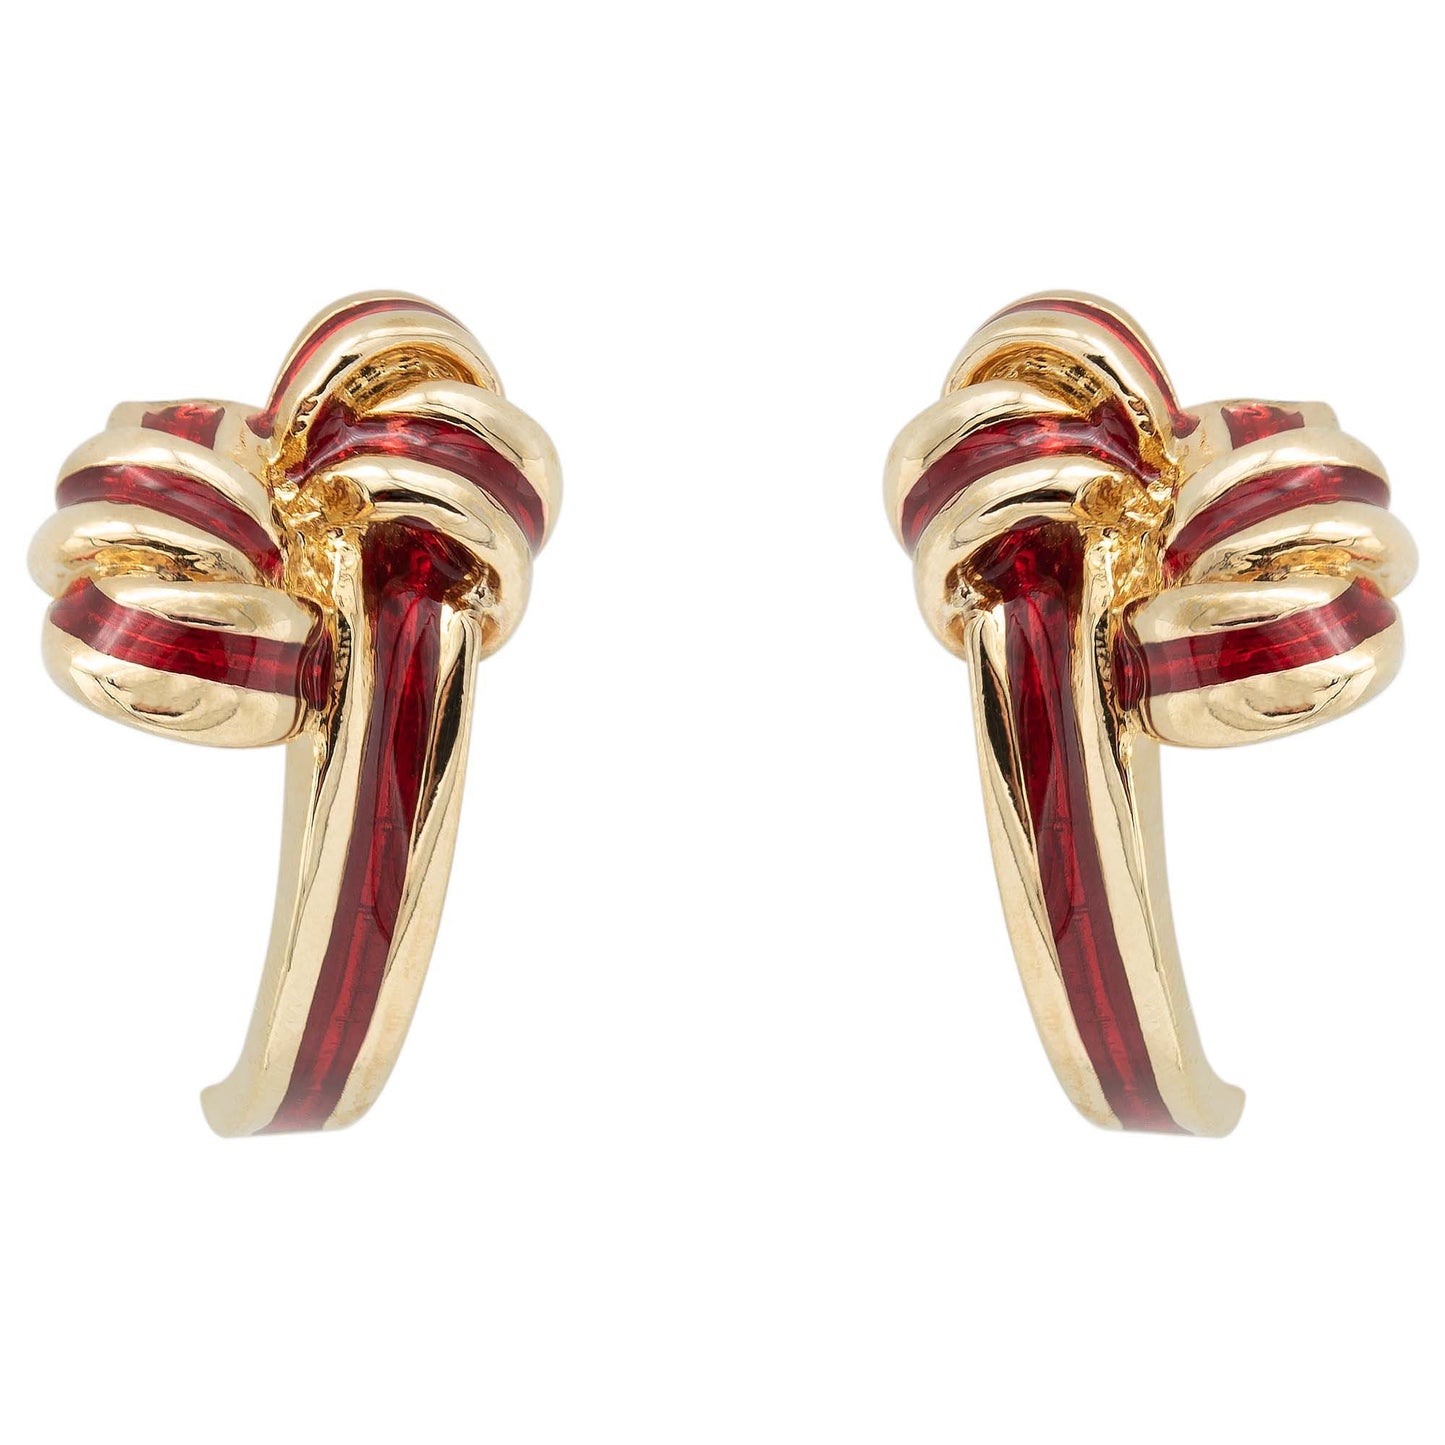 Riley Mid Century Gold and Red Enamel Post Earrings